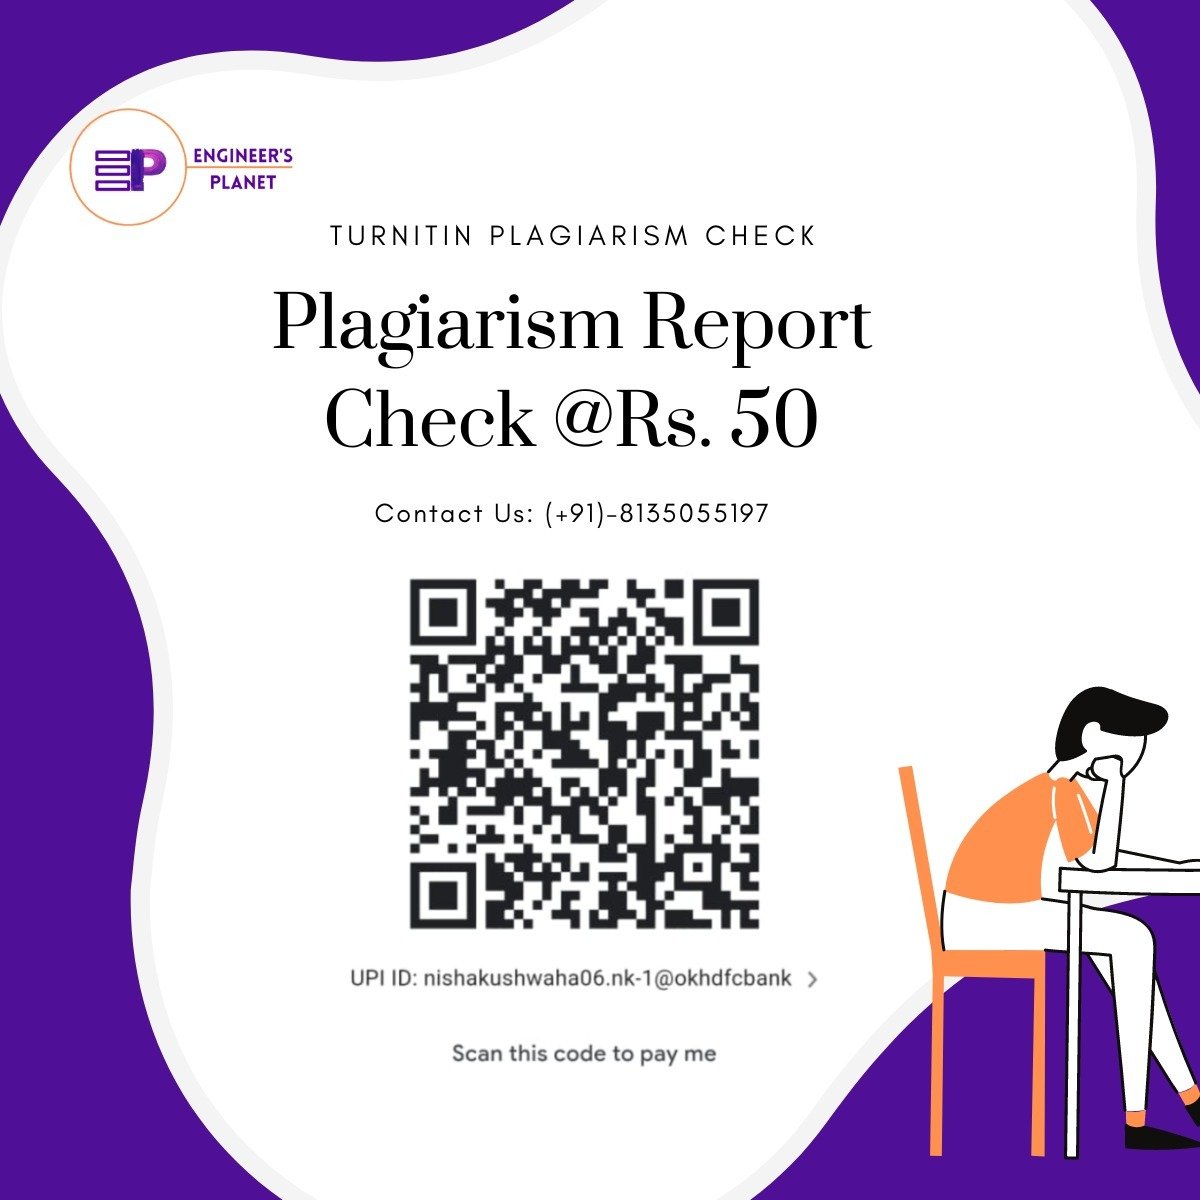 Plagiarism report by Turnitin